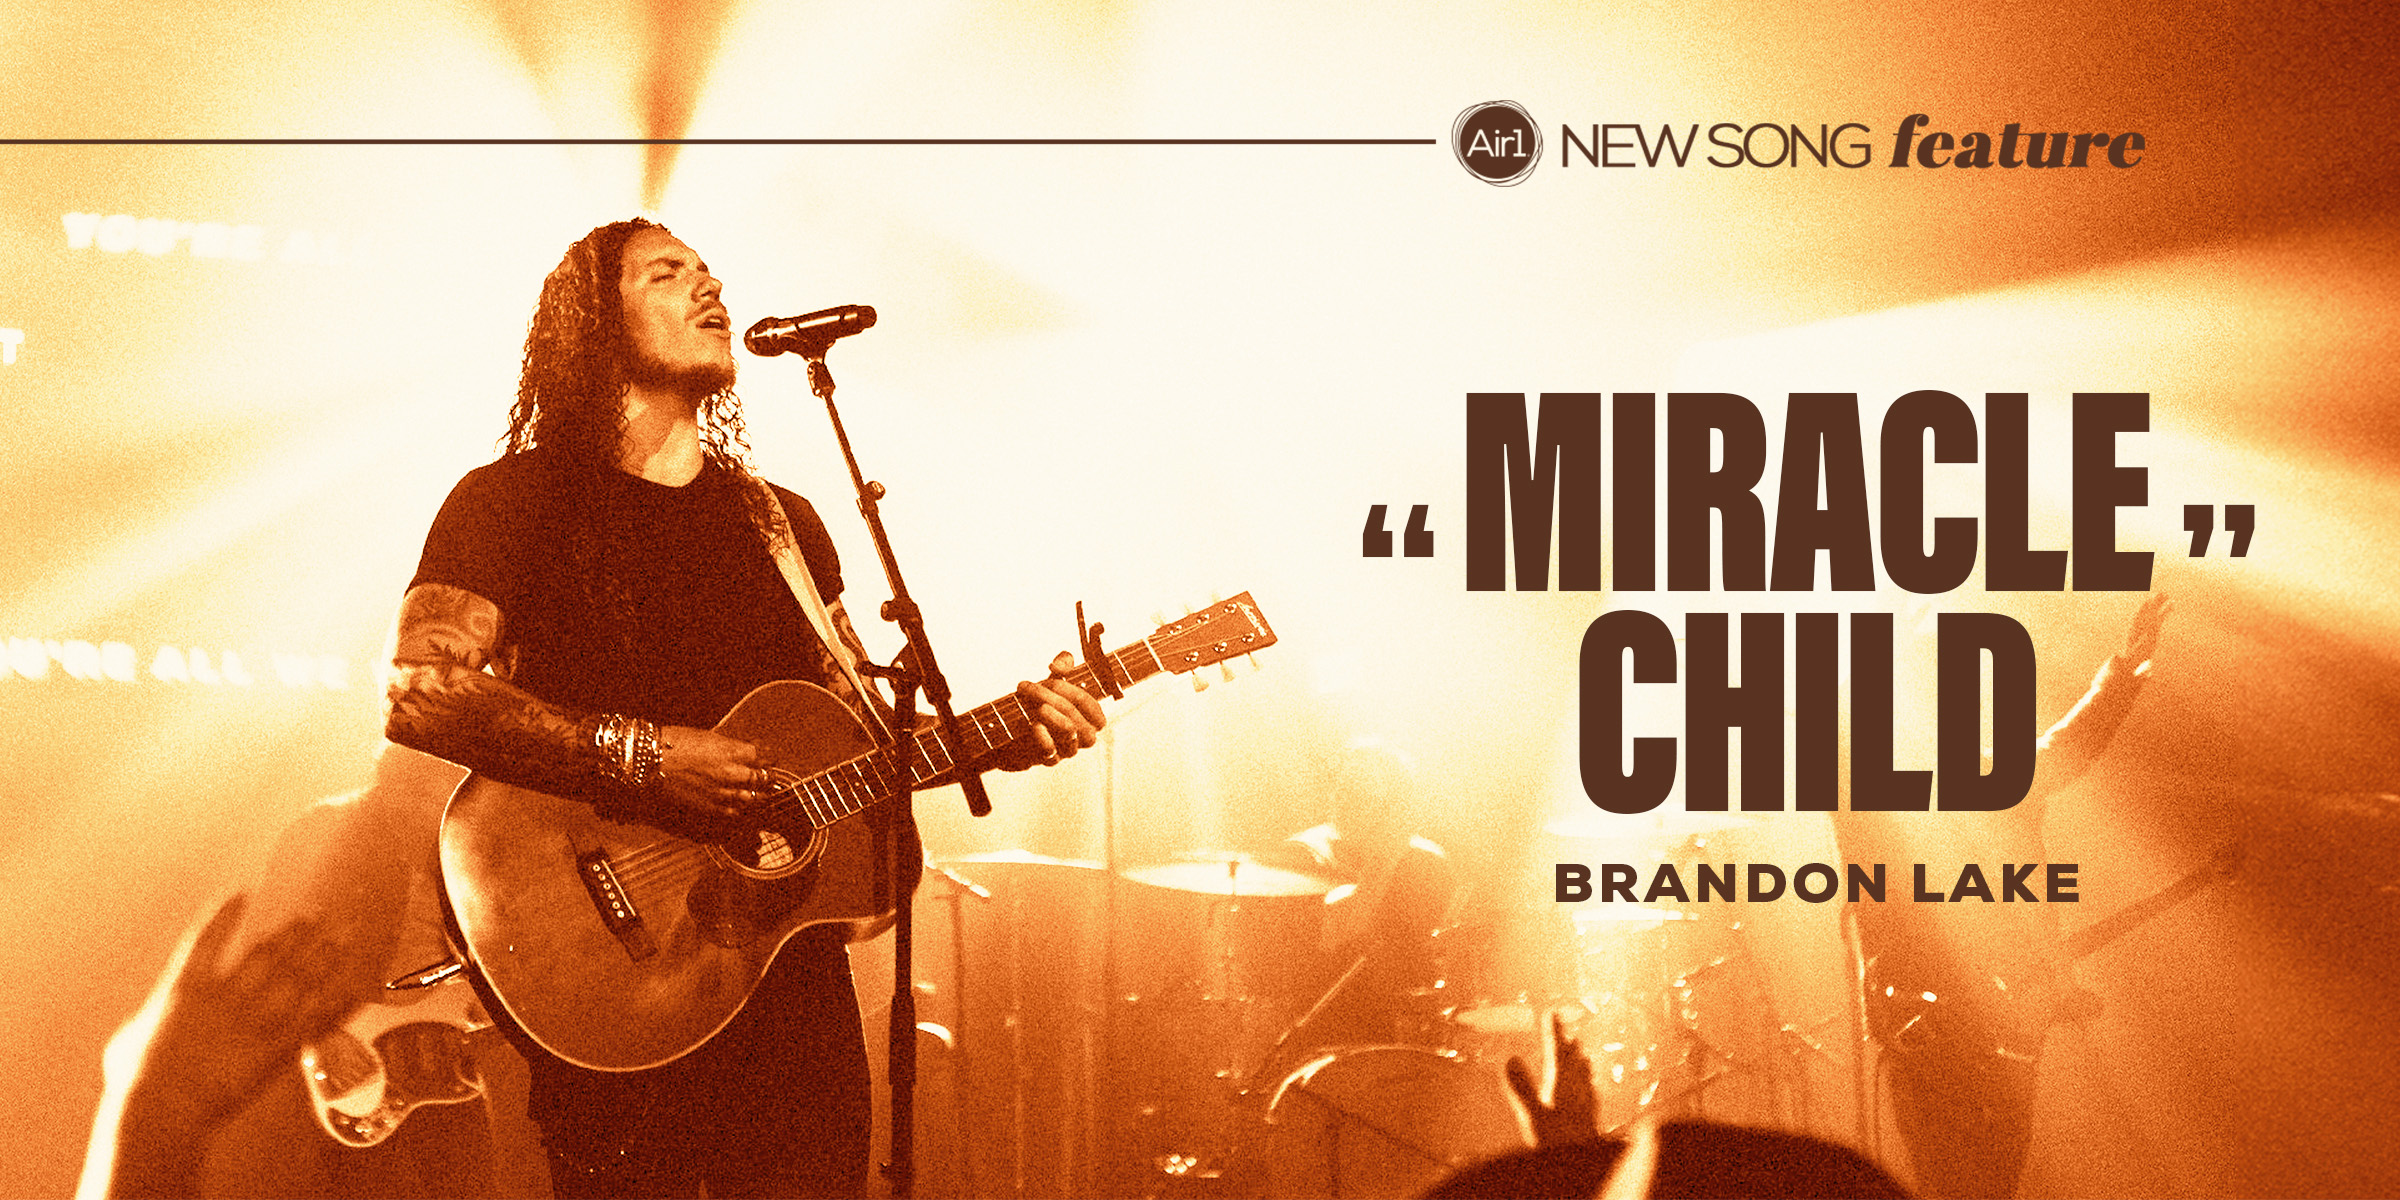 New Song Feature: "Miracle Child" Brandon Lake